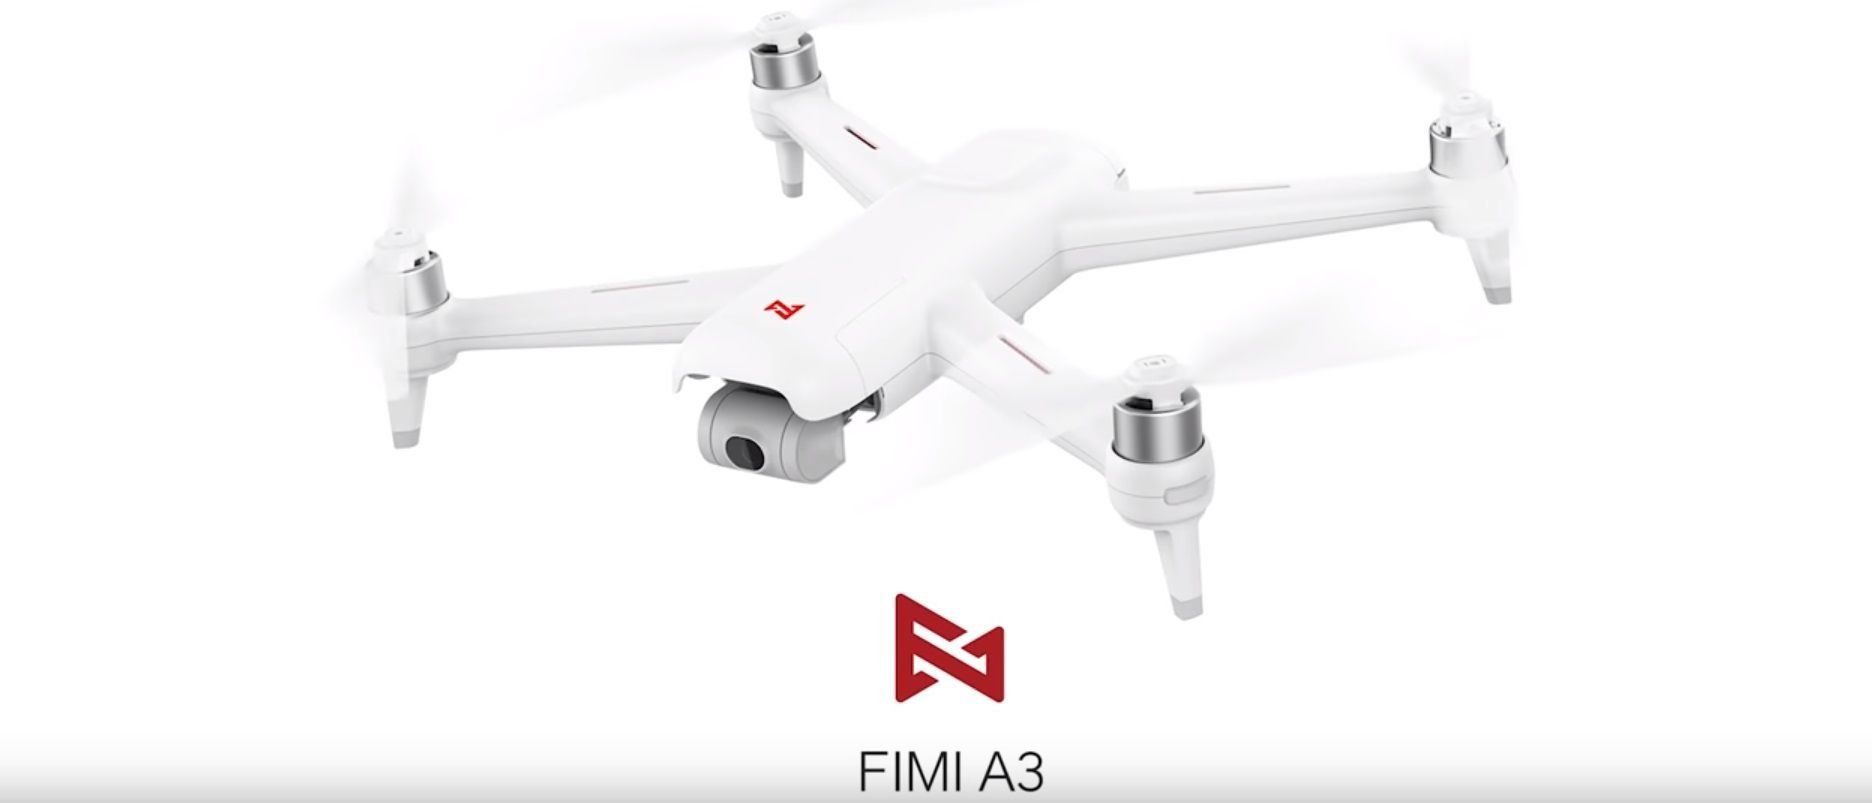 Review of the Xiaomi FIMI A3 quadcopter with advantages and disadvantages